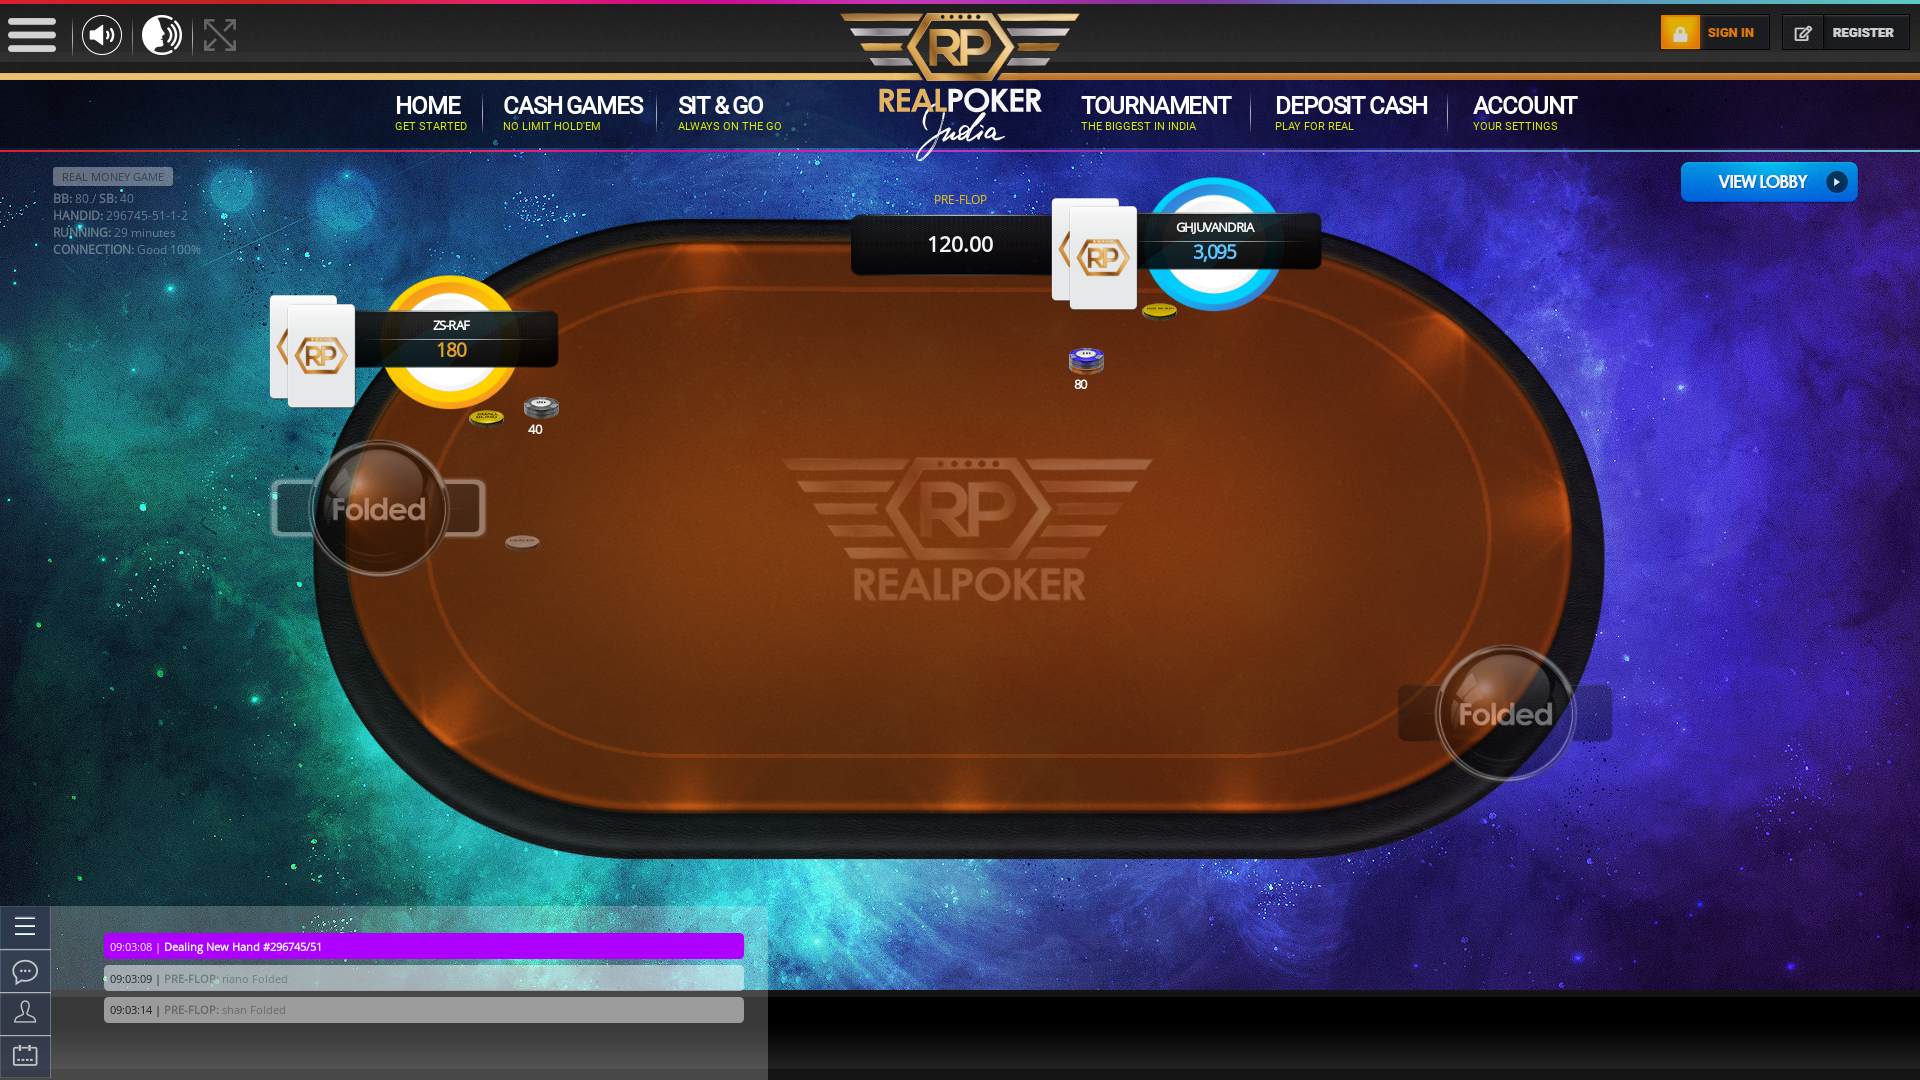 Online poker on a 10 player table in the 29th minute match up